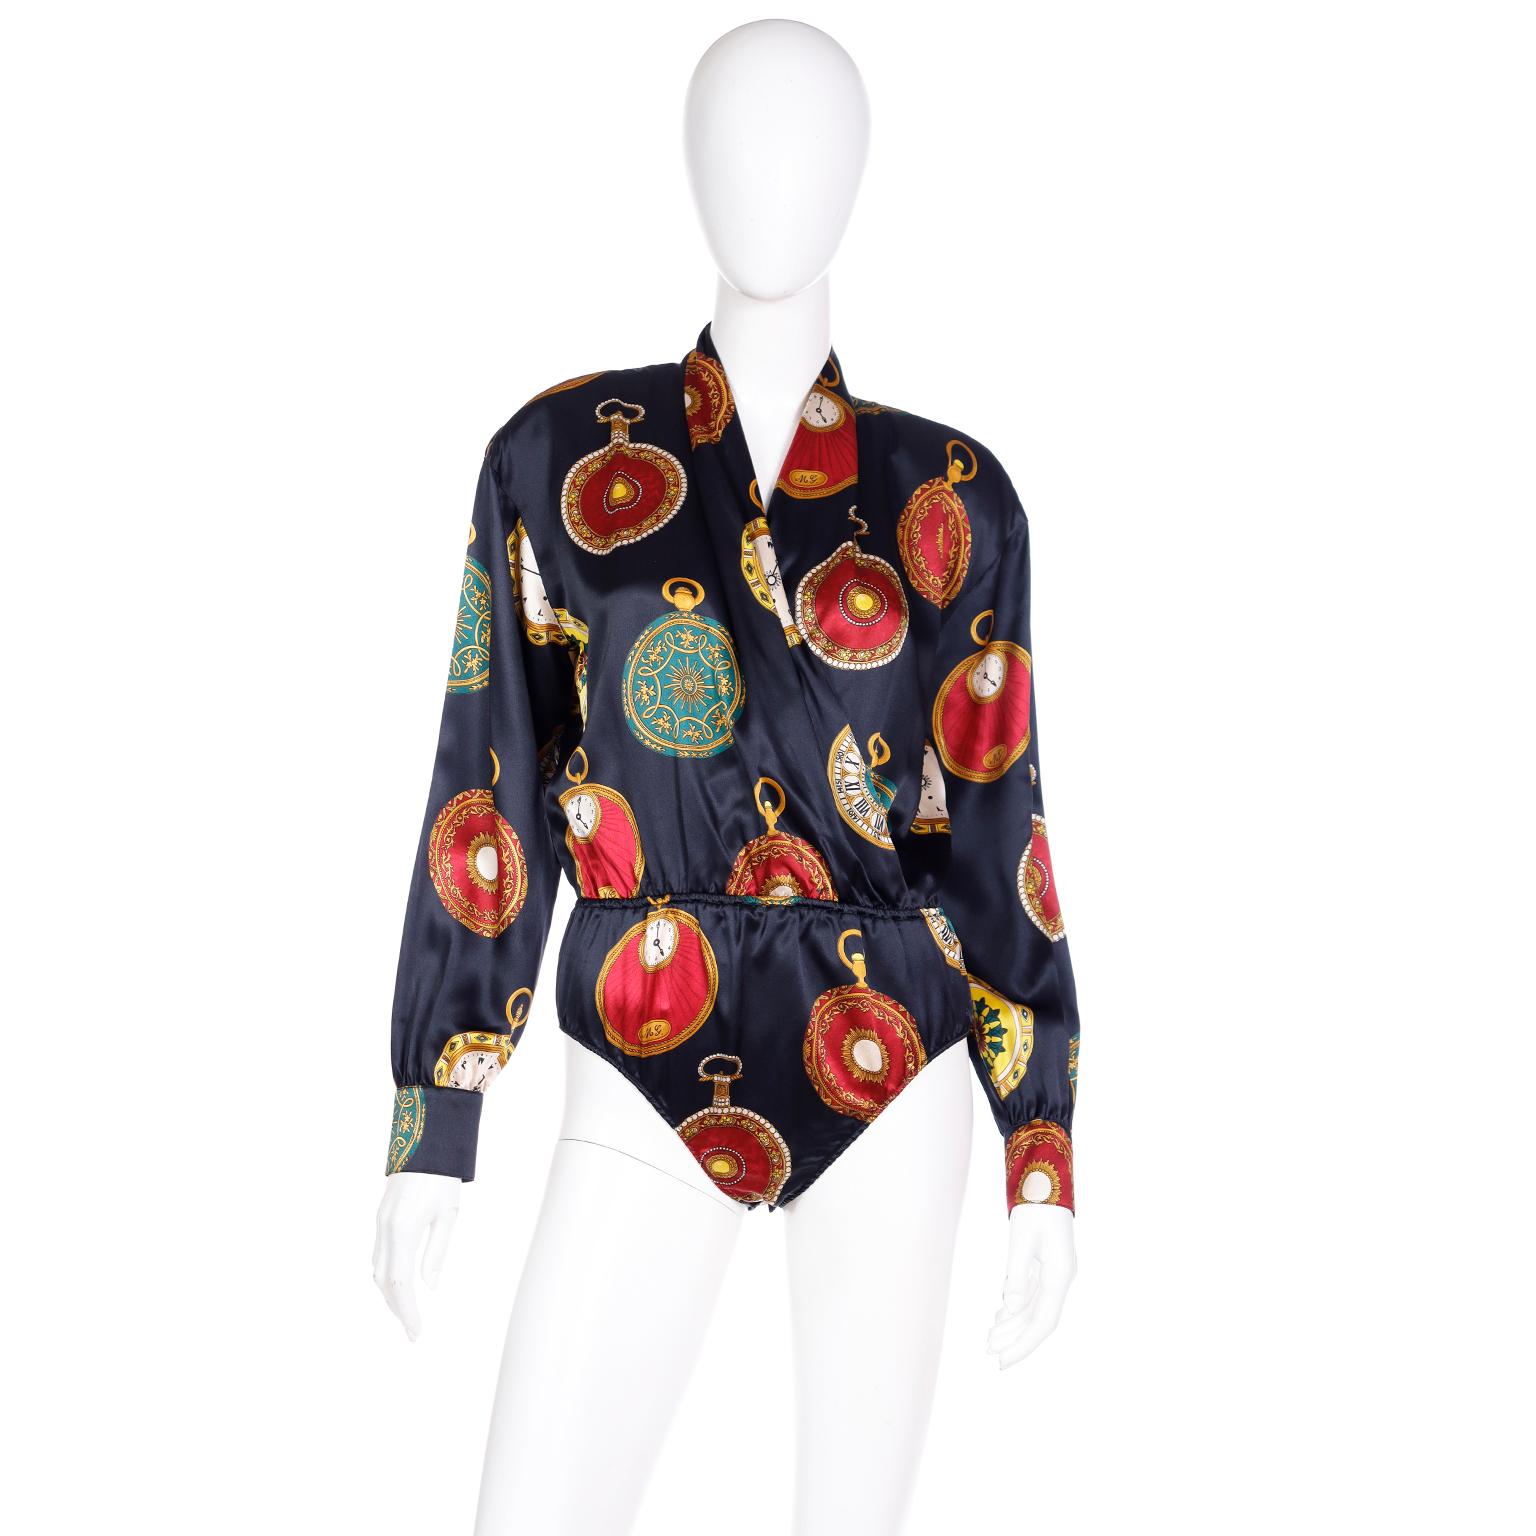 We love a vintage Escada novelty print and this pocket watch print is so fabulous! This luxe silk bodysuit style blouse is black with multi colored pocket watches featuring decorative cases,clock faces, and ML; Margaretha Ley's initials. Even the